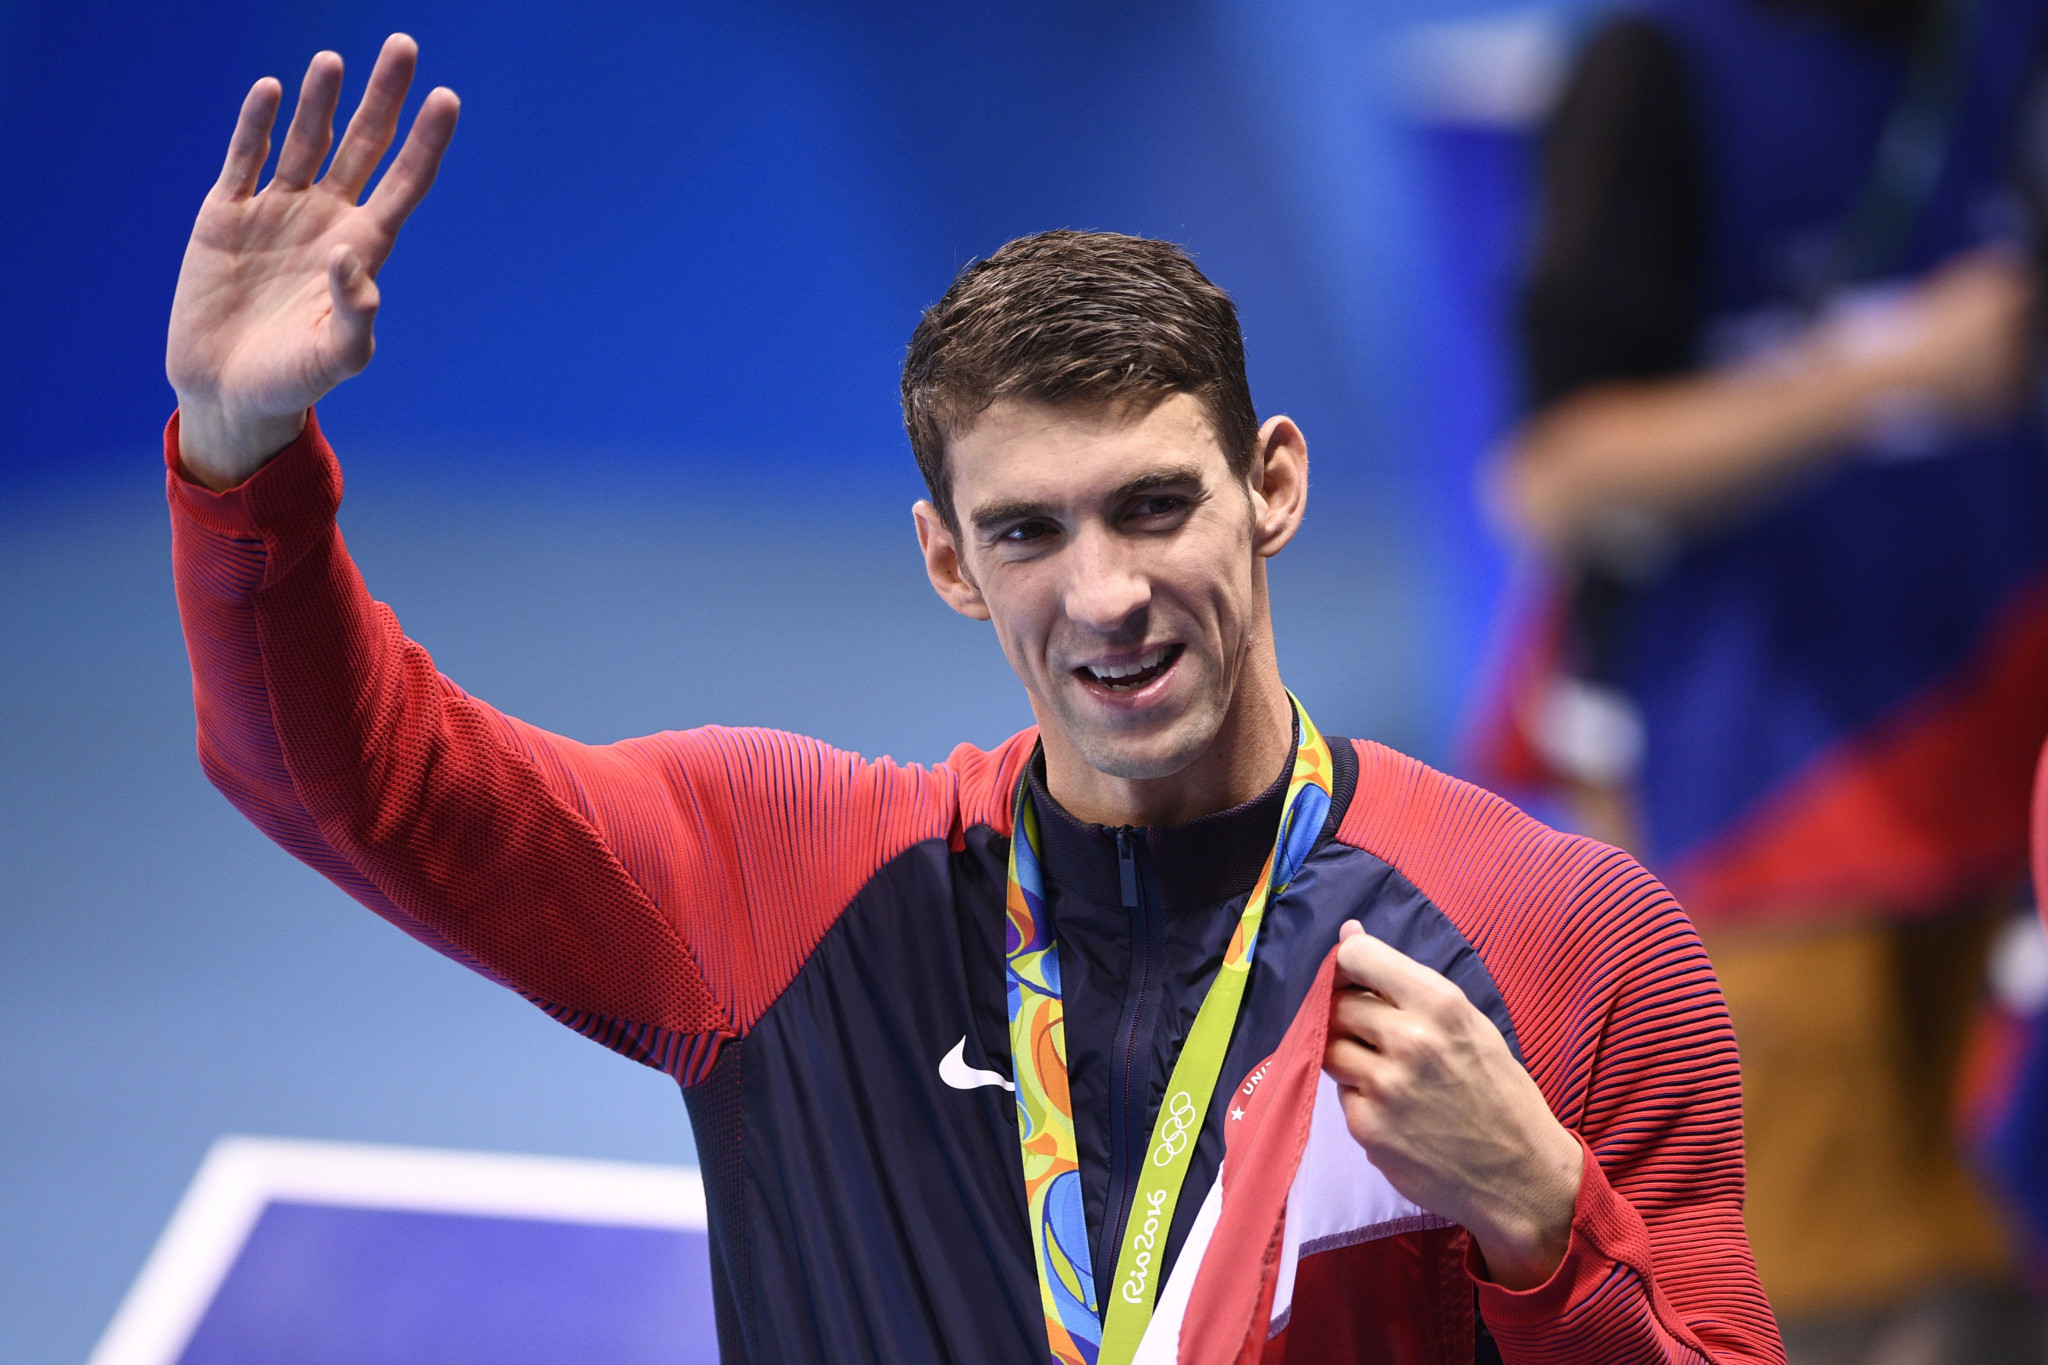 Record breakers Phelps and Zorn-Hudson set for US Olympic and Paralympic Hall of Fame induction